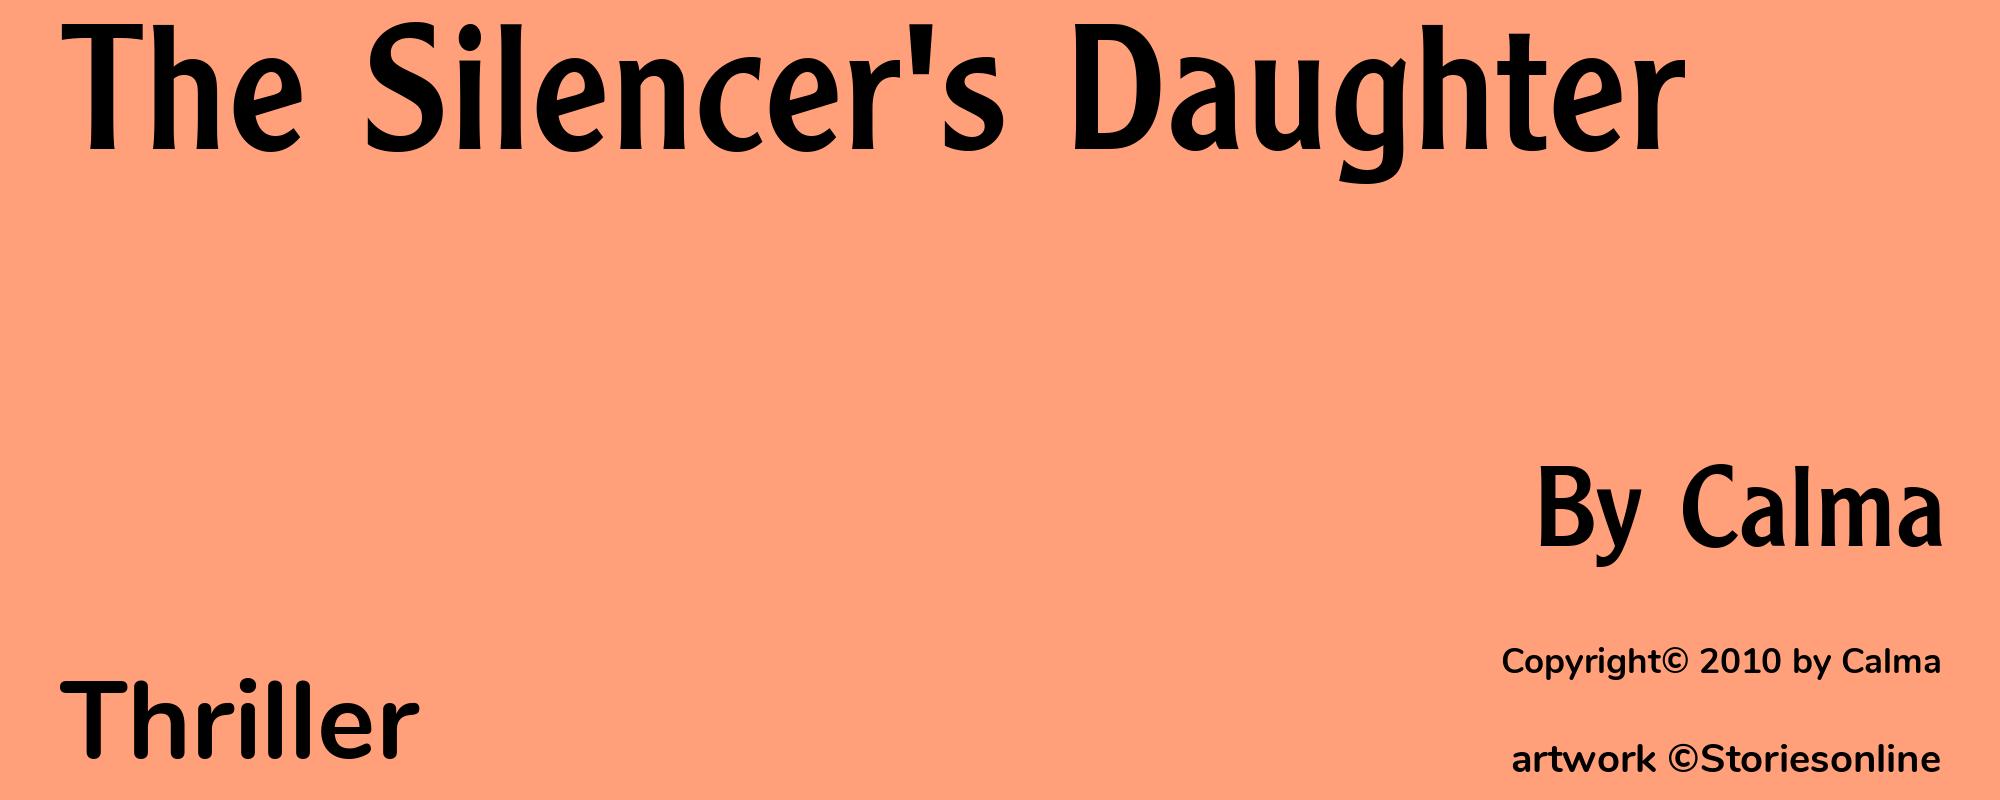 The Silencer's Daughter - Cover